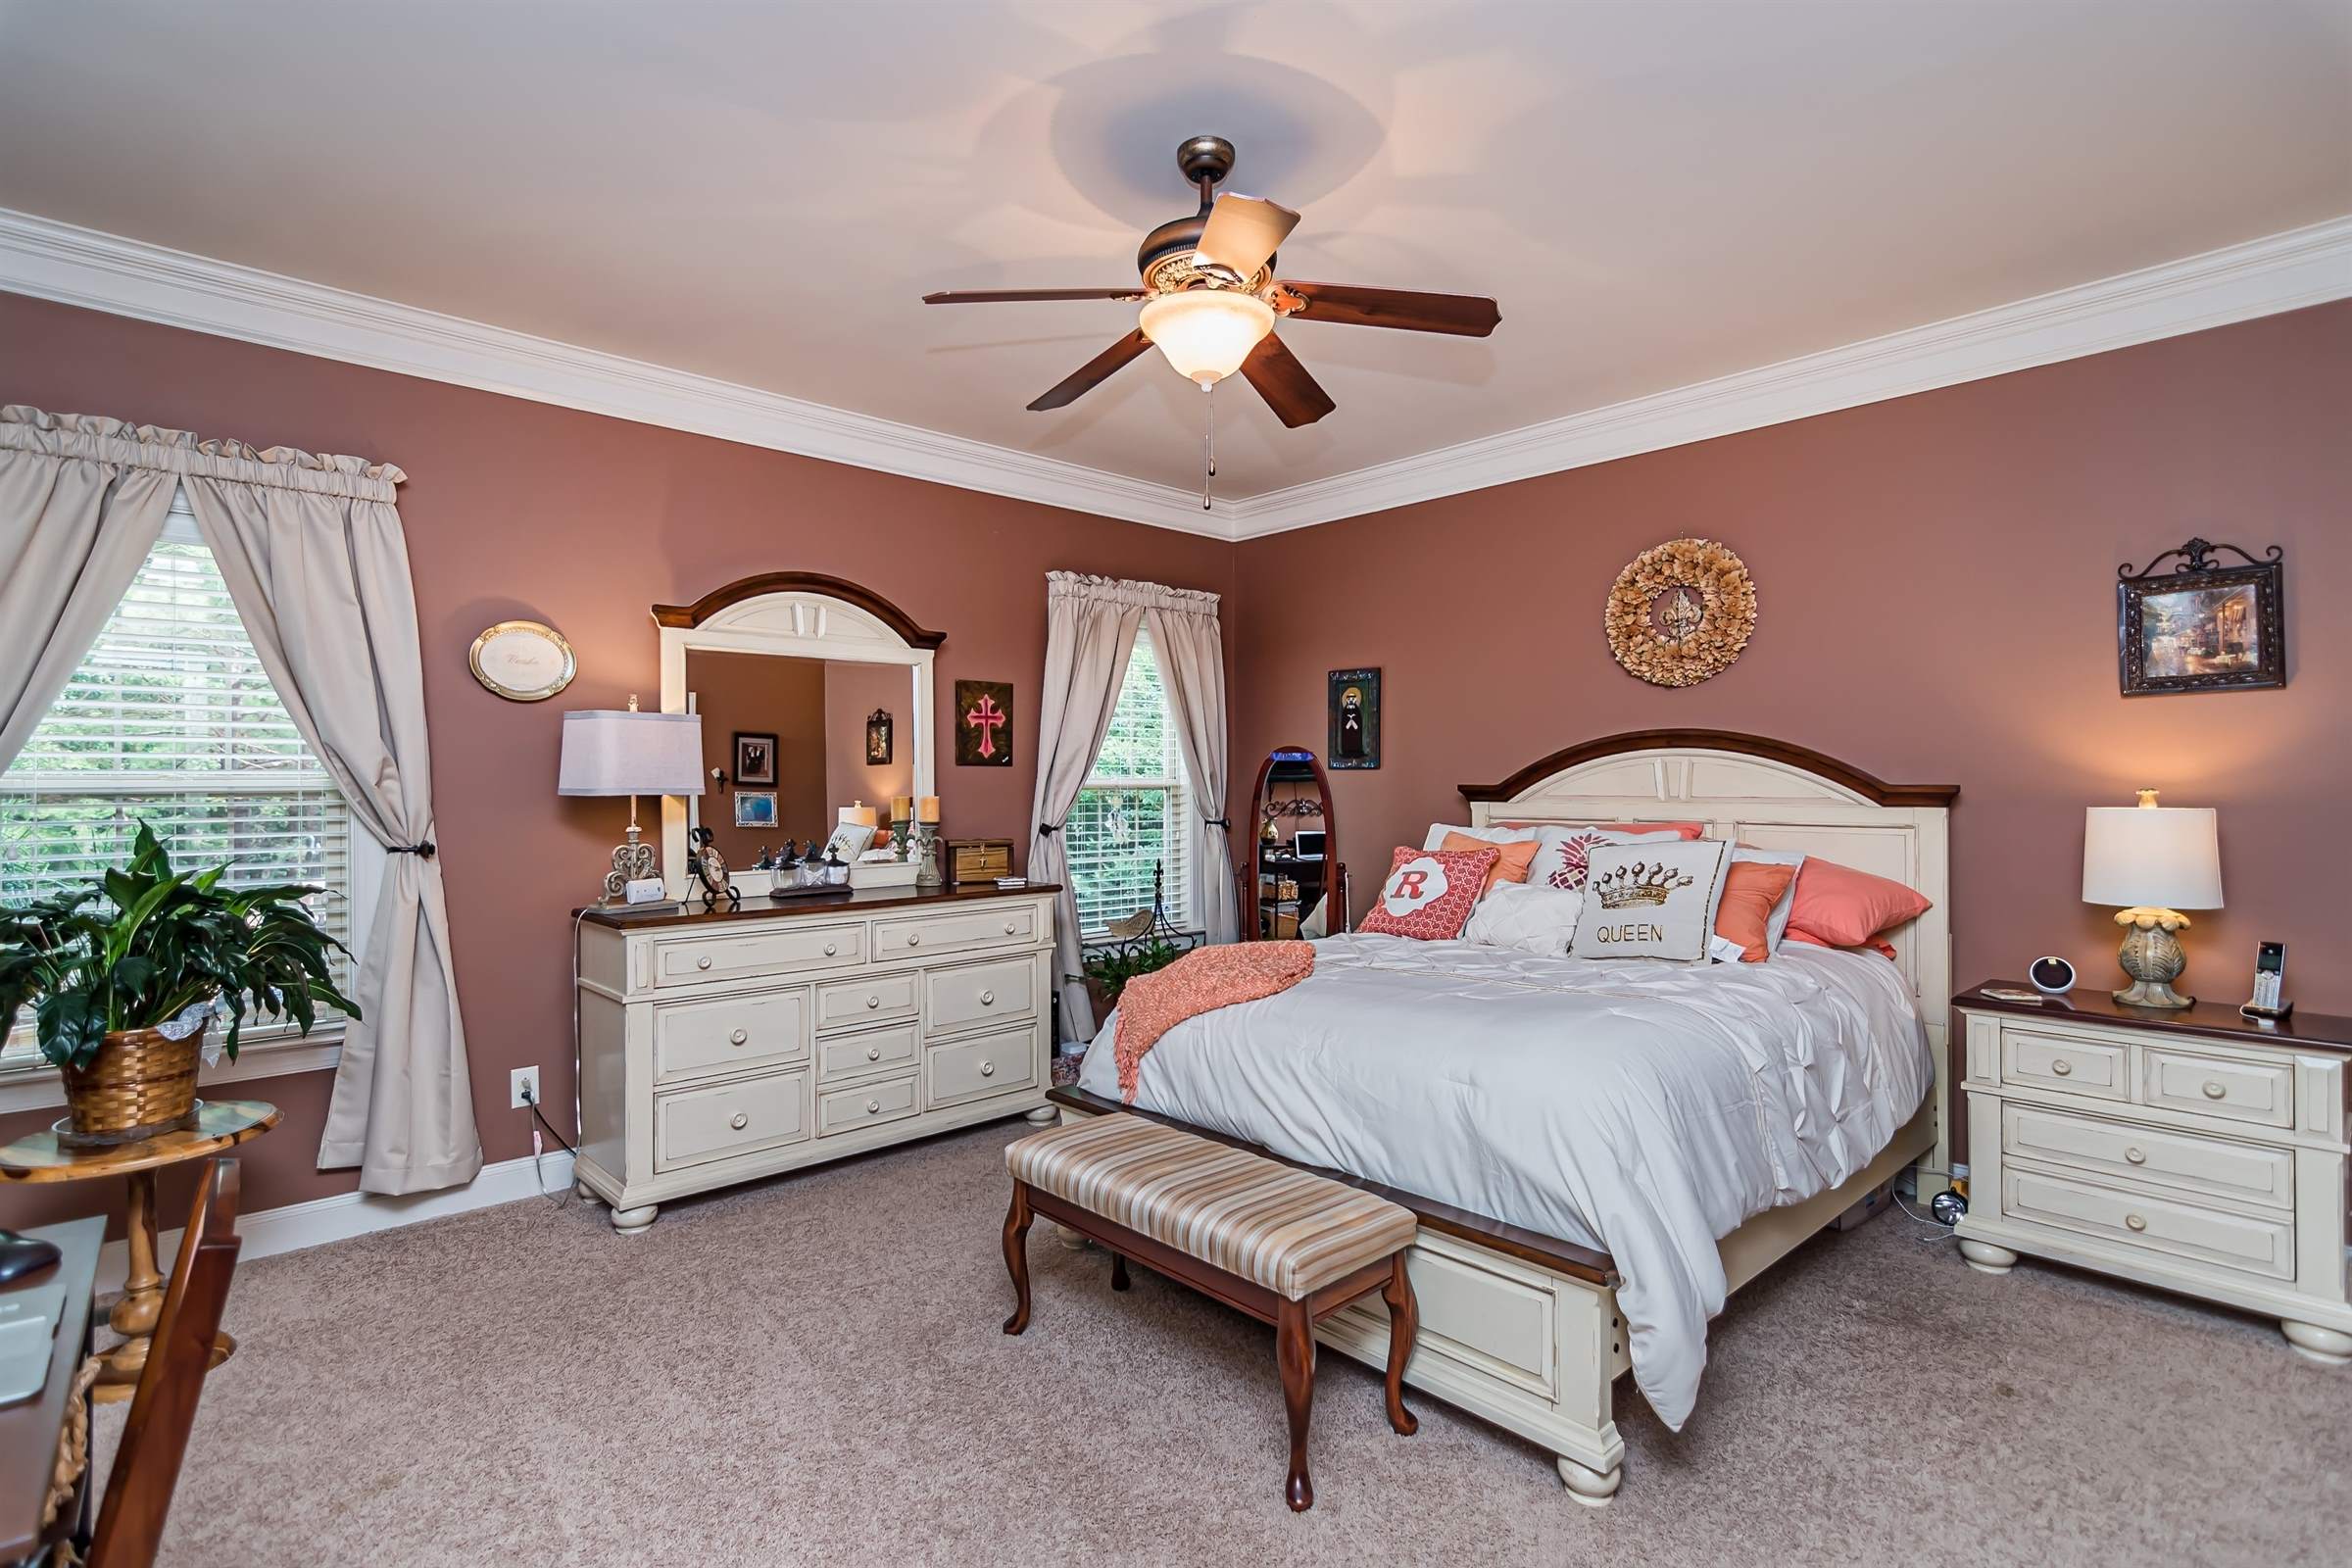 8204 Angels Glen Ct, Stokesdale, NC 27357